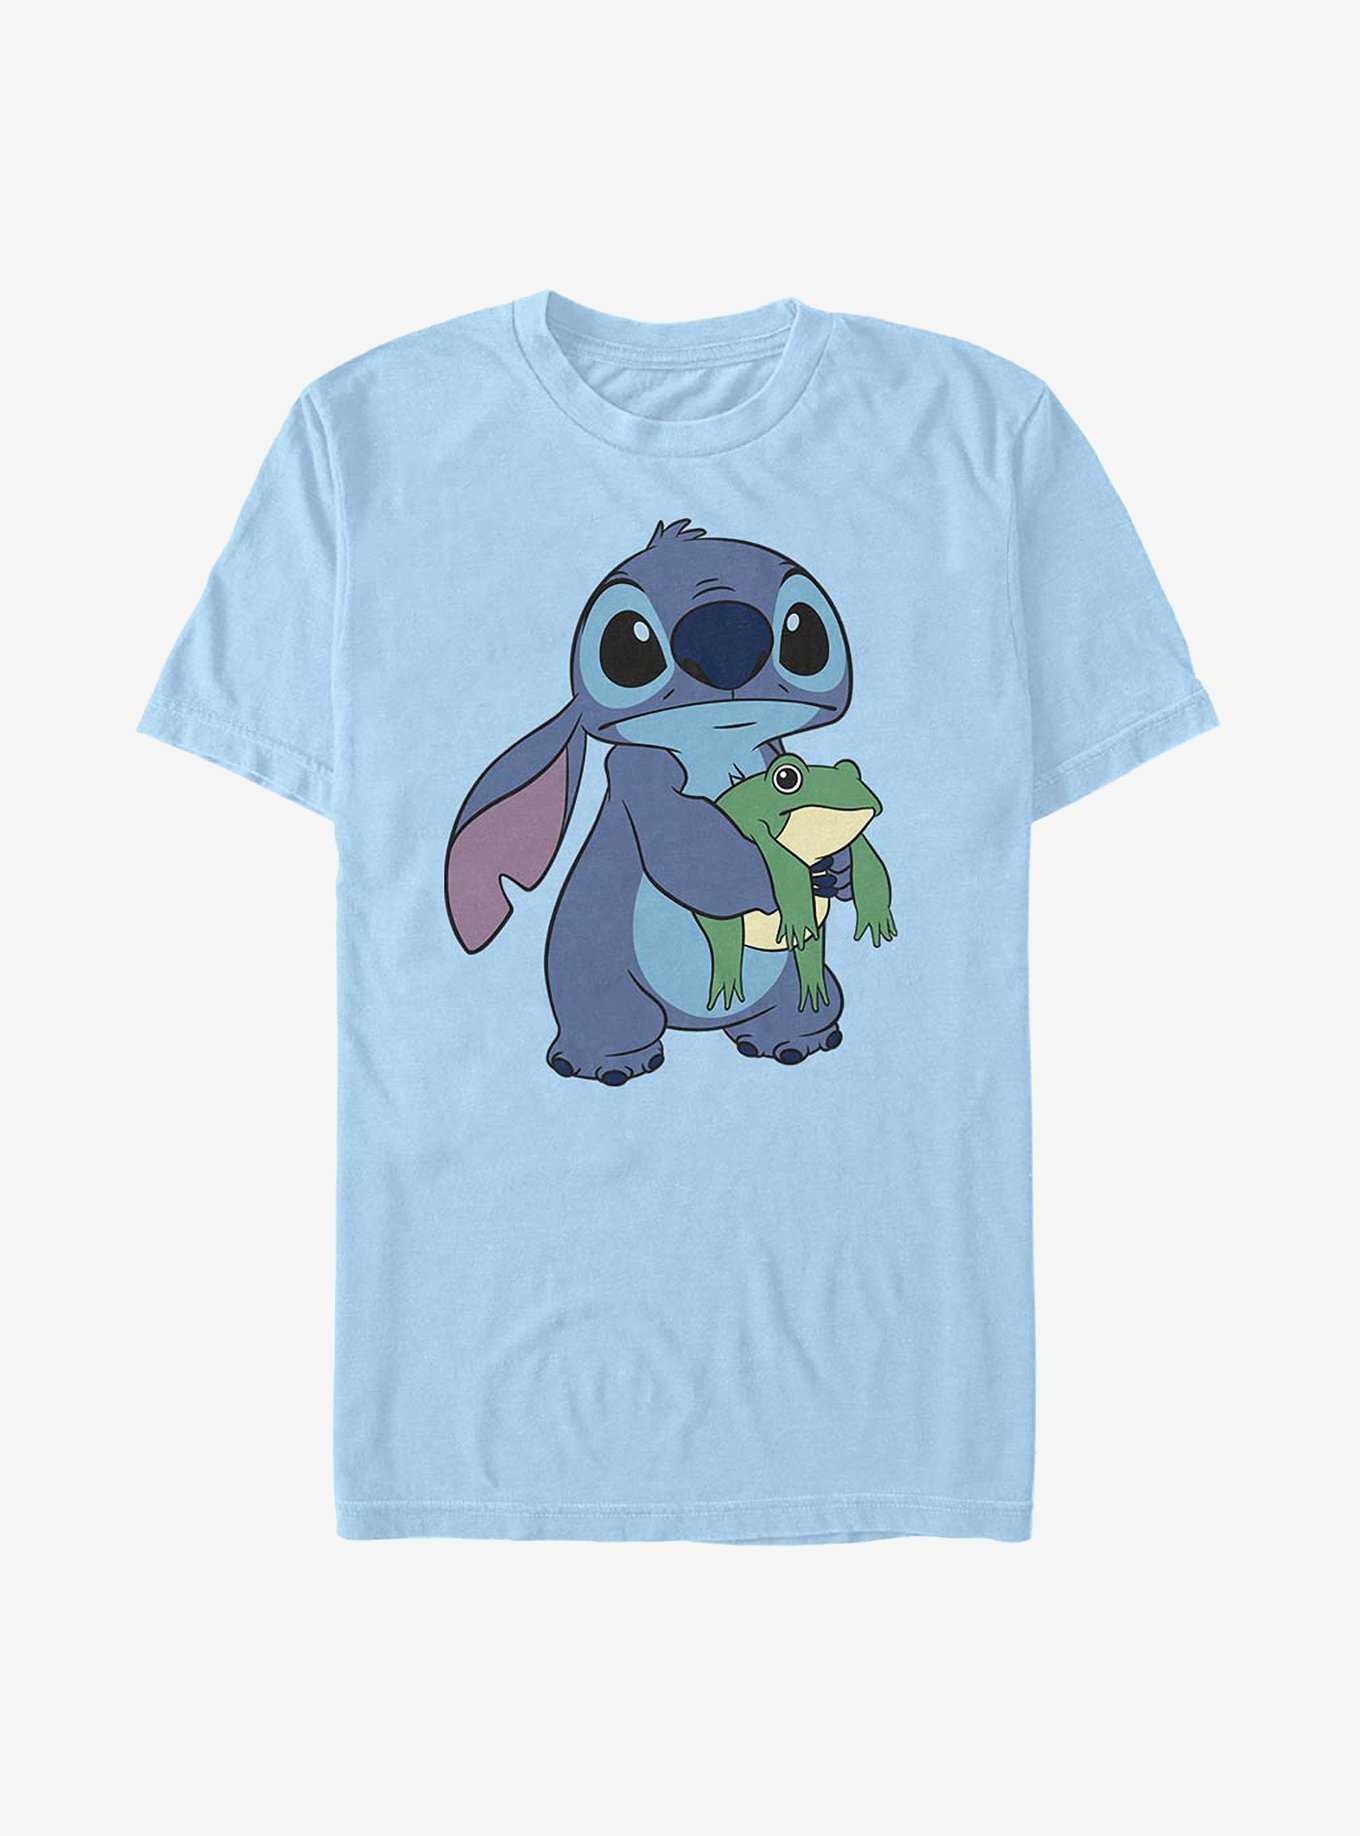 Lilo & Stitch ©Disney pencils and stickers set - Cartoons - Collabs -  CLOTHING - Girl - Kids 